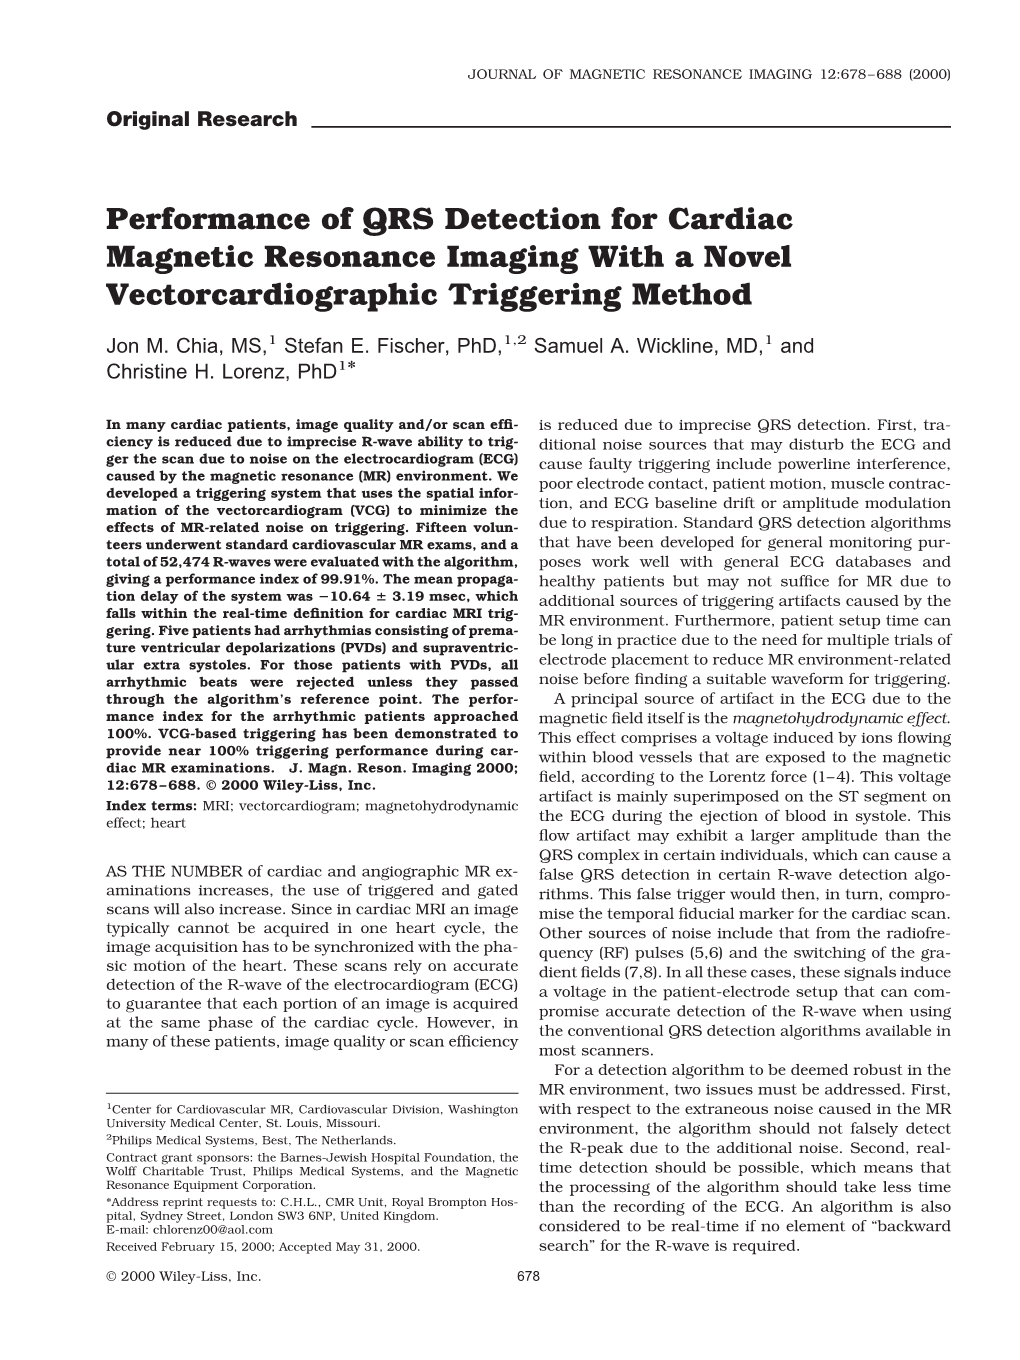 Performance of QRS Detection for Cardiac Magnetic Resonance Imaging with a Novel Vectorcardiographic Triggering Method